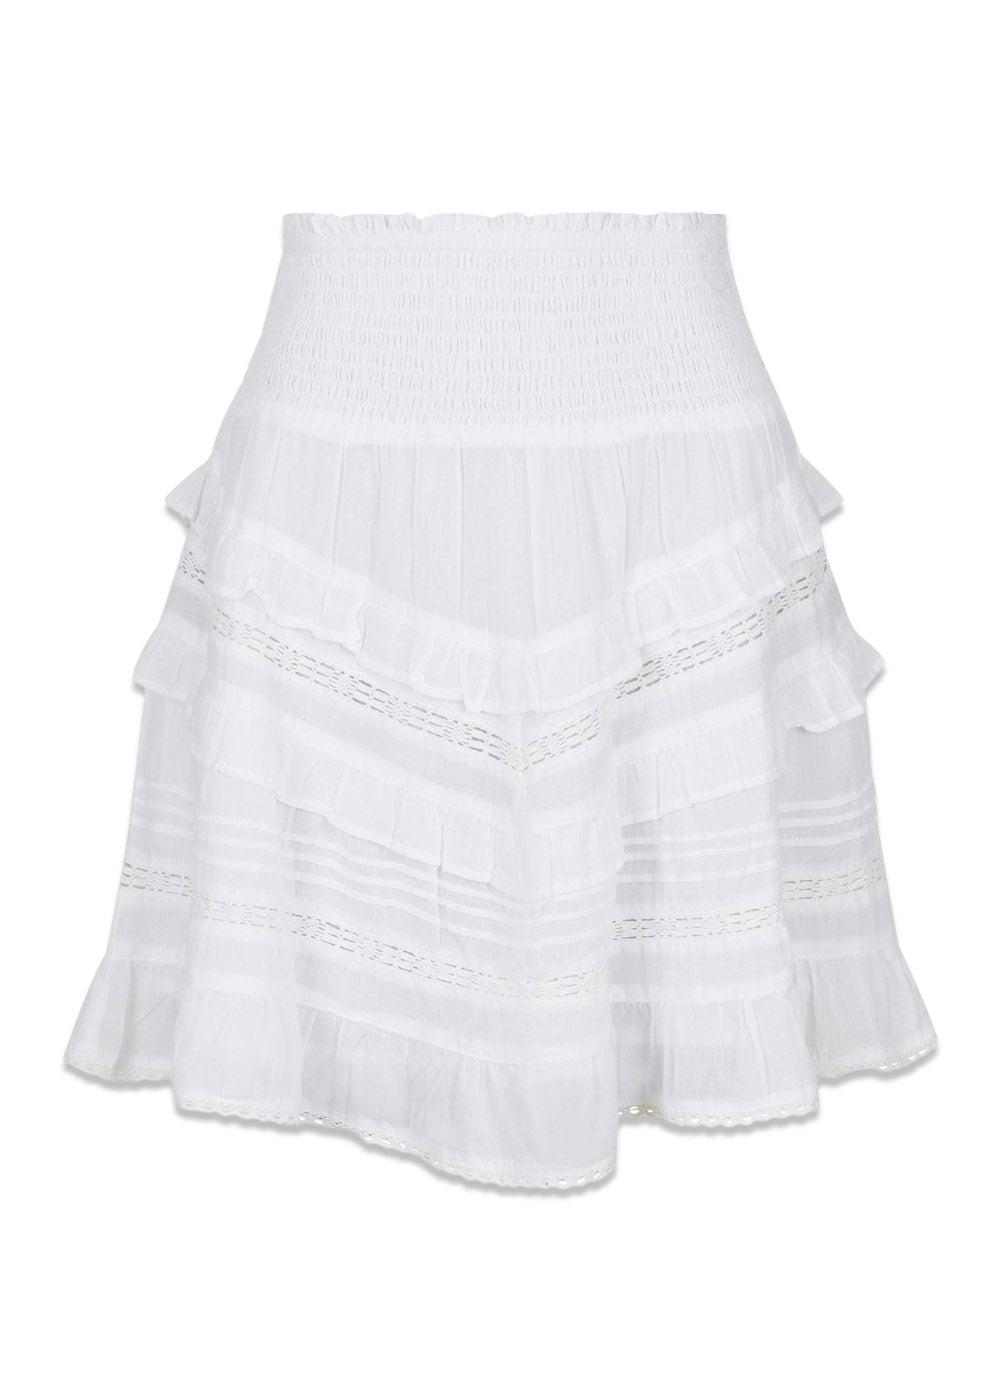 Neo Noirs Donna S Voile Skirt - White. Køb skirts her.